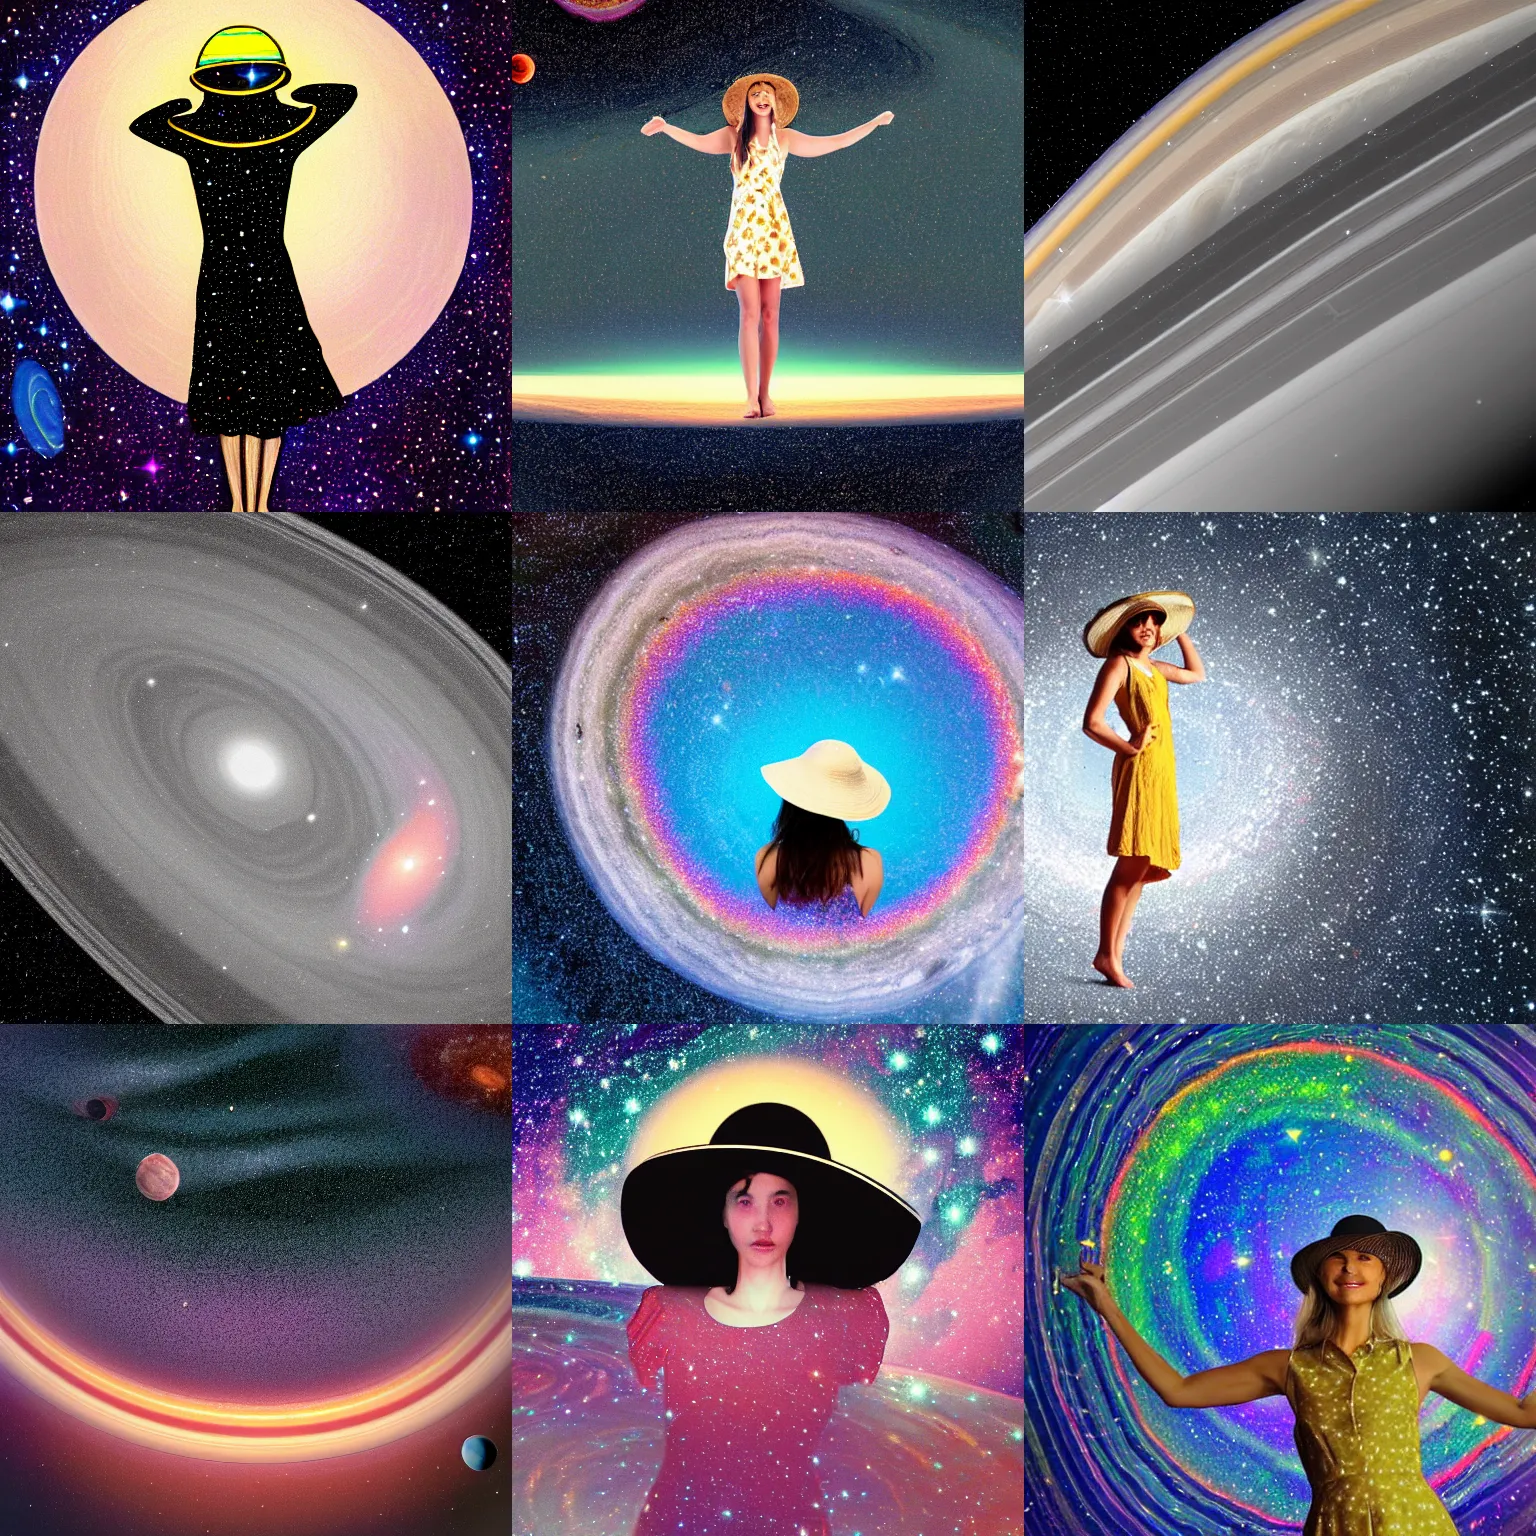 Prompt: image of woman composed of galaxies sitting on the edge of the rings of saturn, wearing a sunhat, wearing a sundress